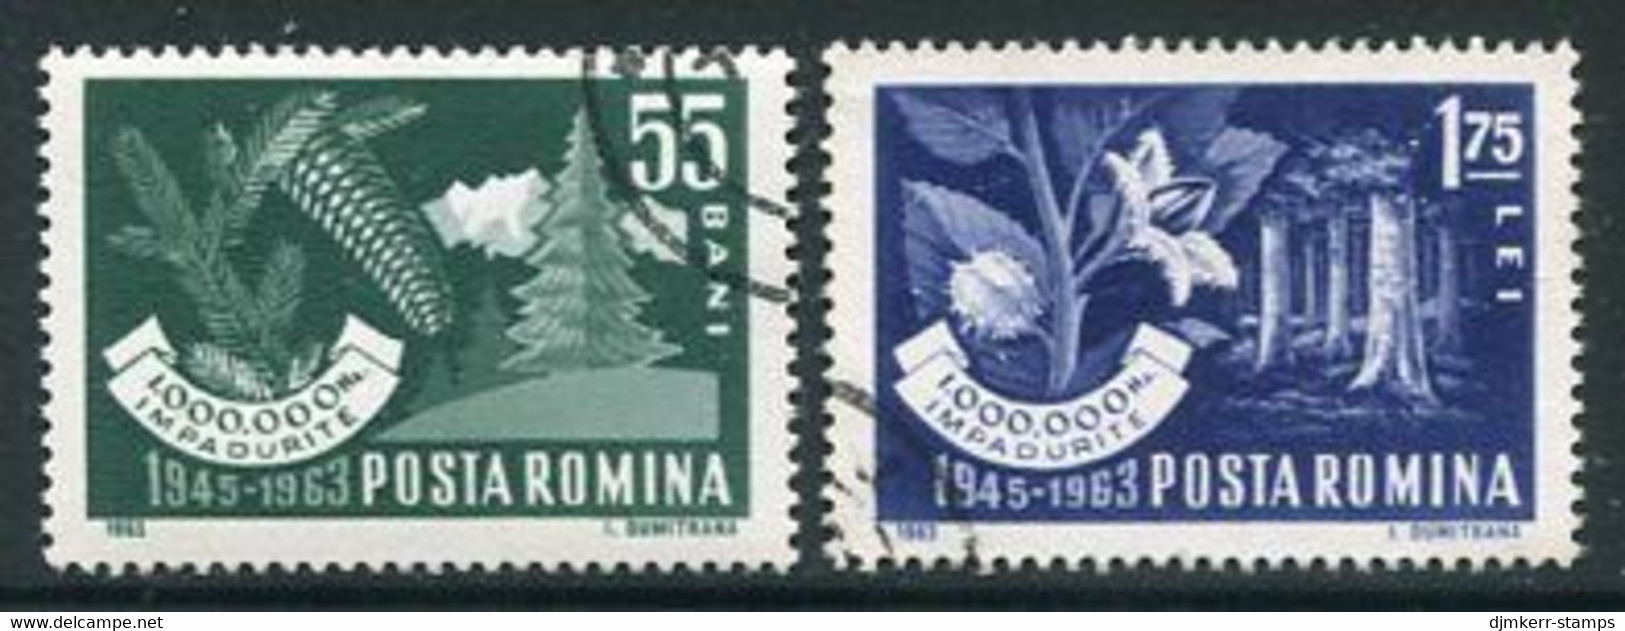 ROMANIA 1963 Forestry Used.  Michel 2212-13 - Used Stamps